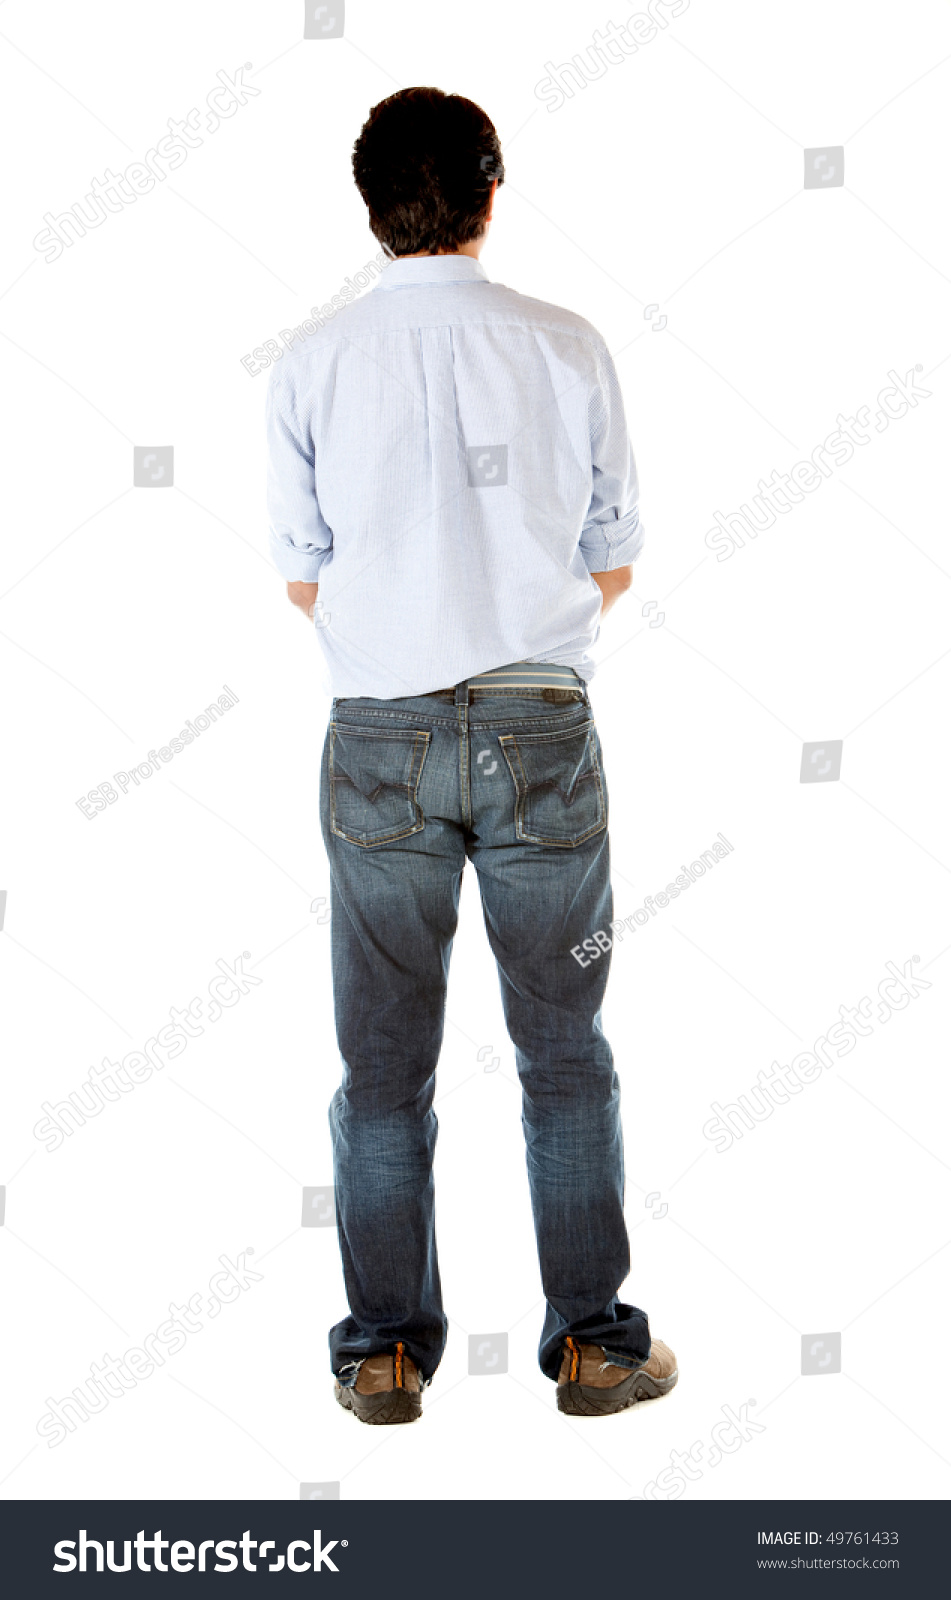 Man Standing Giving His Back To The Camera Isolated Over A White ...